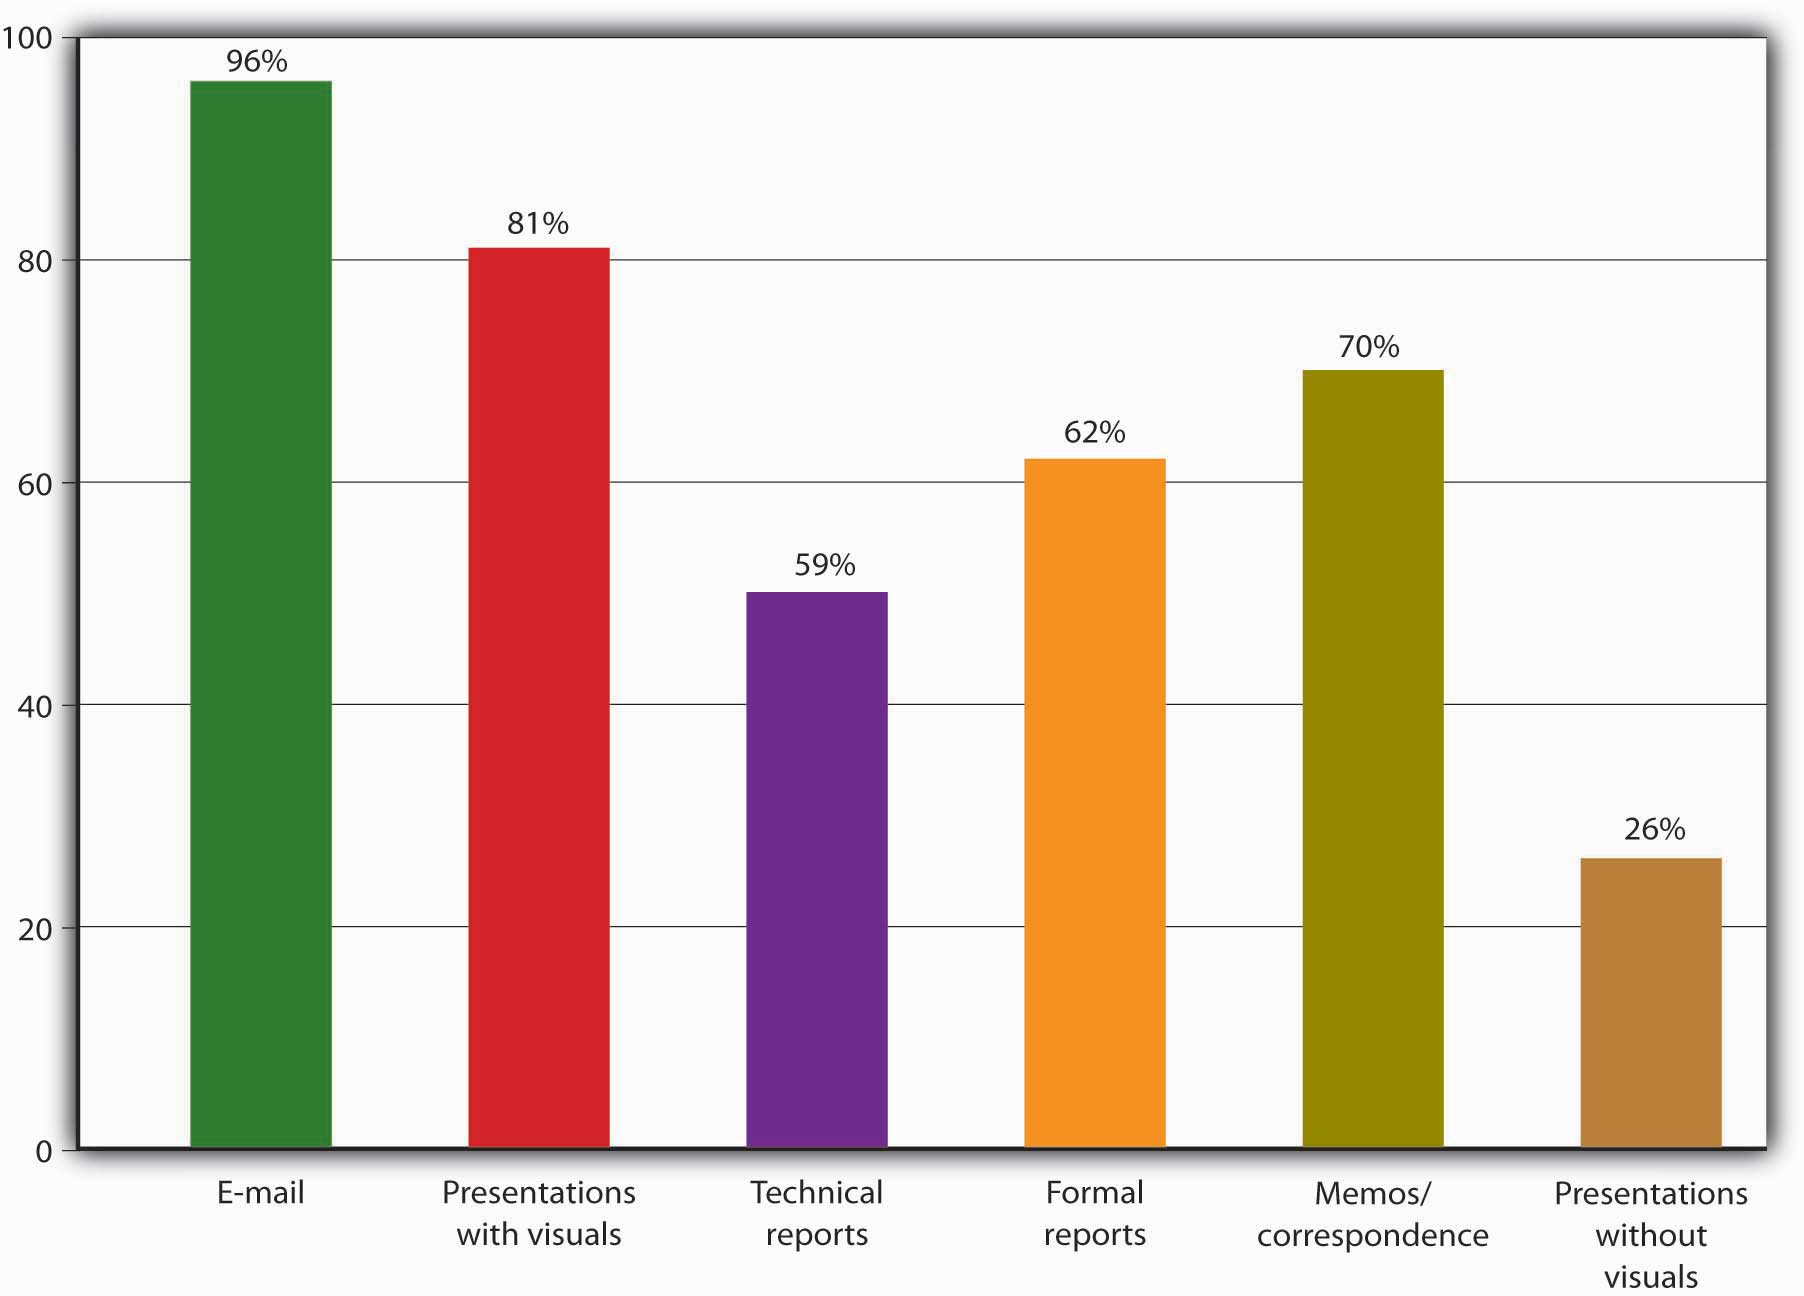 A bar graph showing required Skills: E-mail, Presentations with visuals, Technical reports, Formal reports, Memos/correspondence, and Presentations without visuals